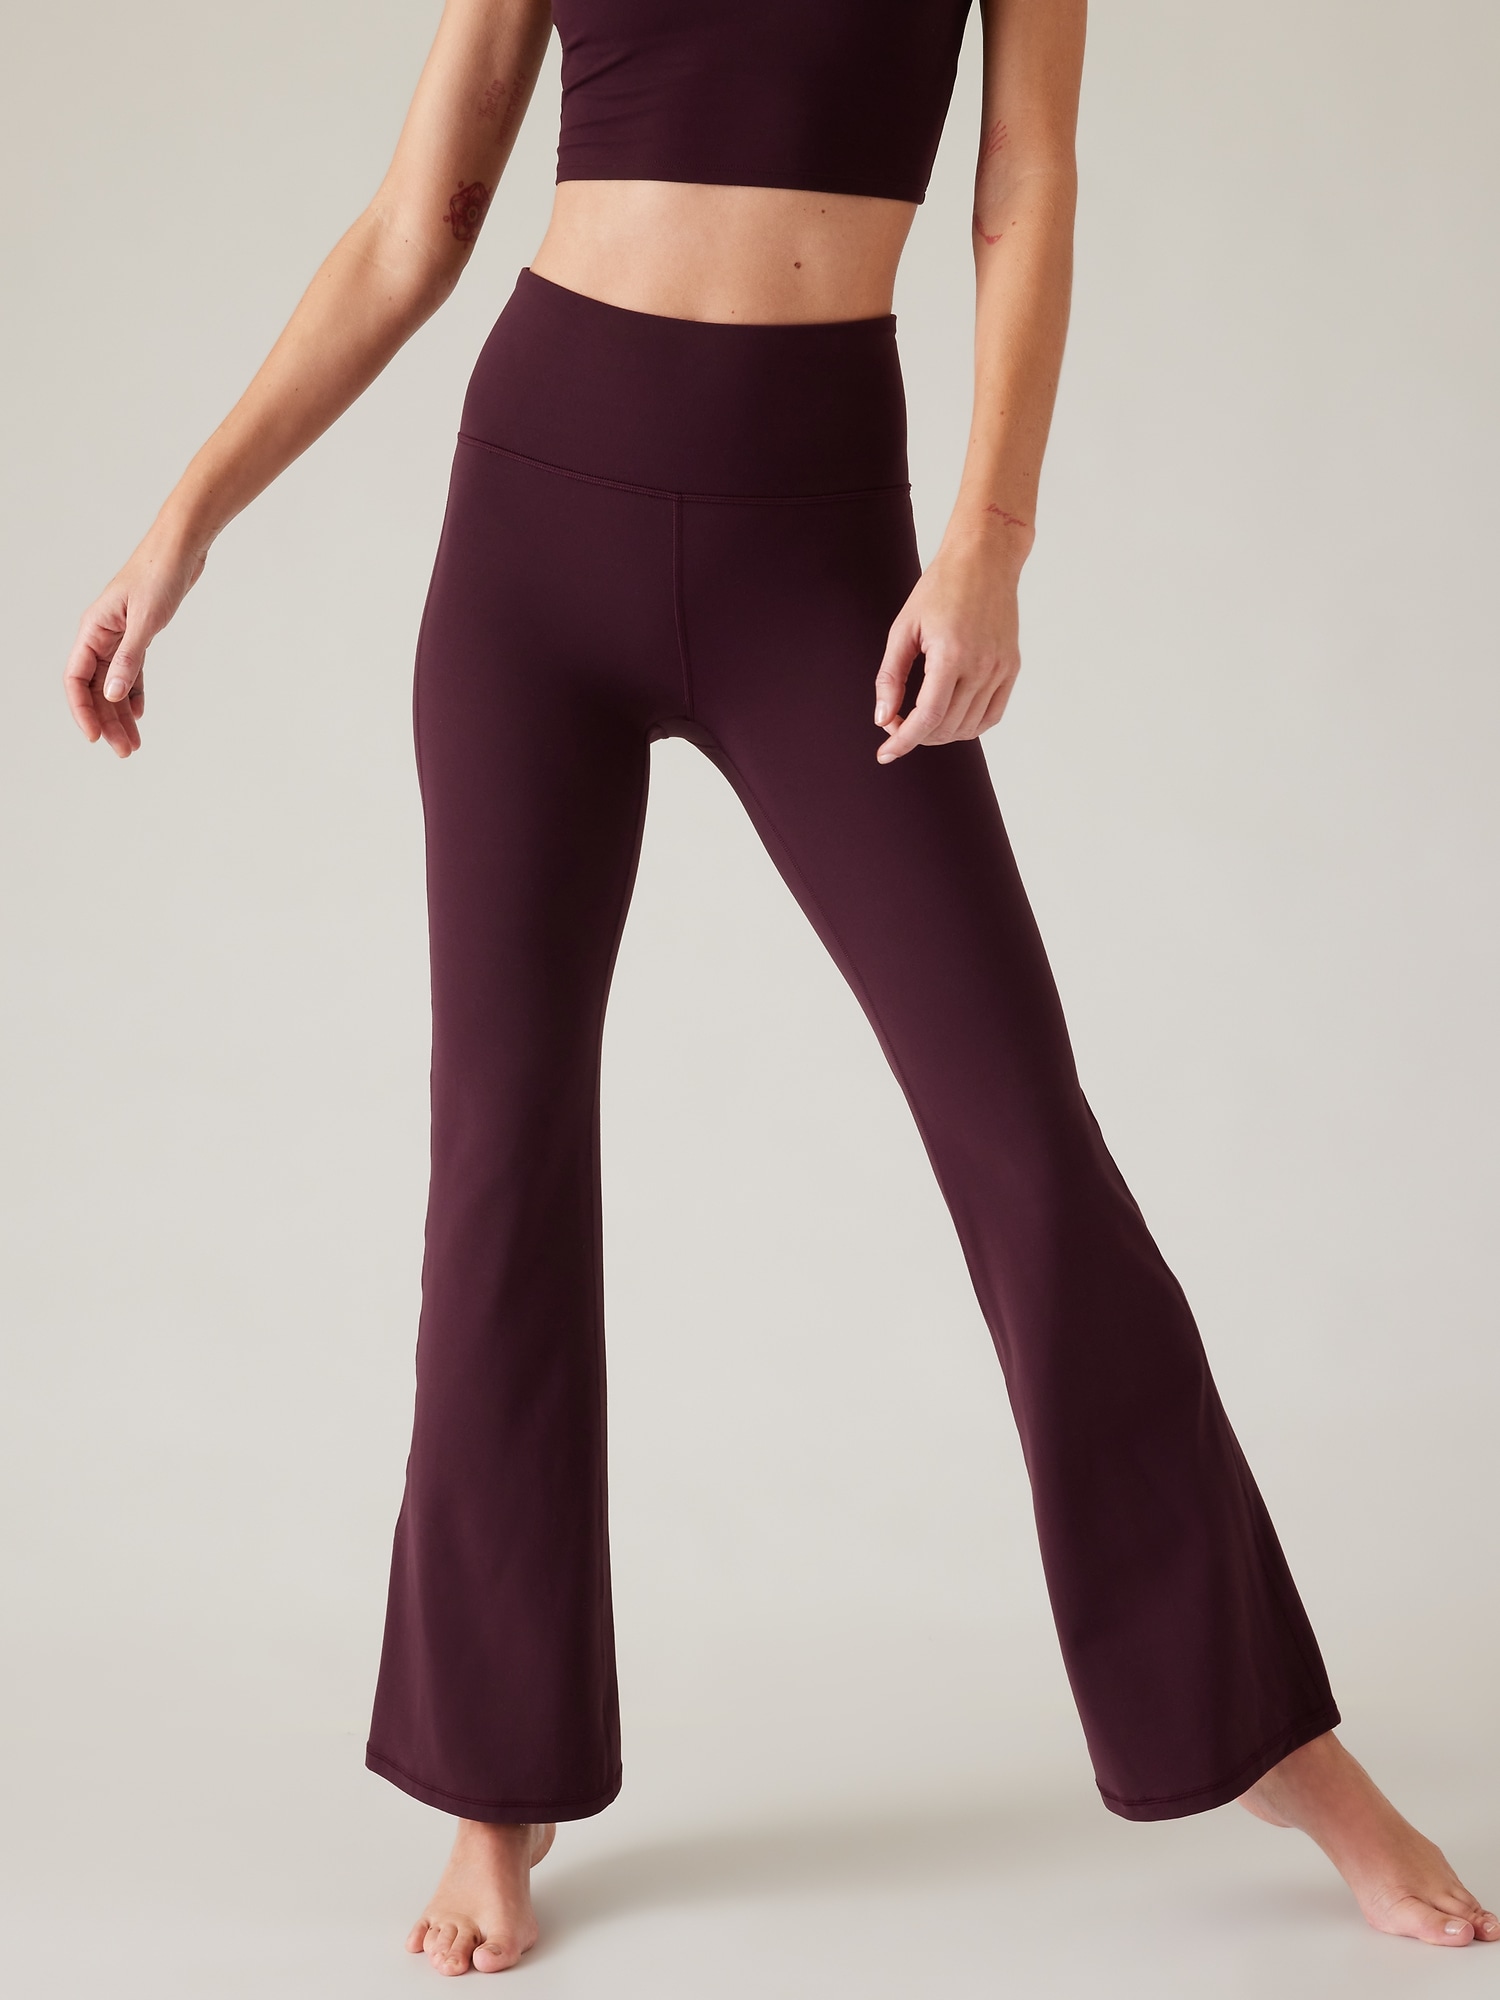 Flare Exercise Pants